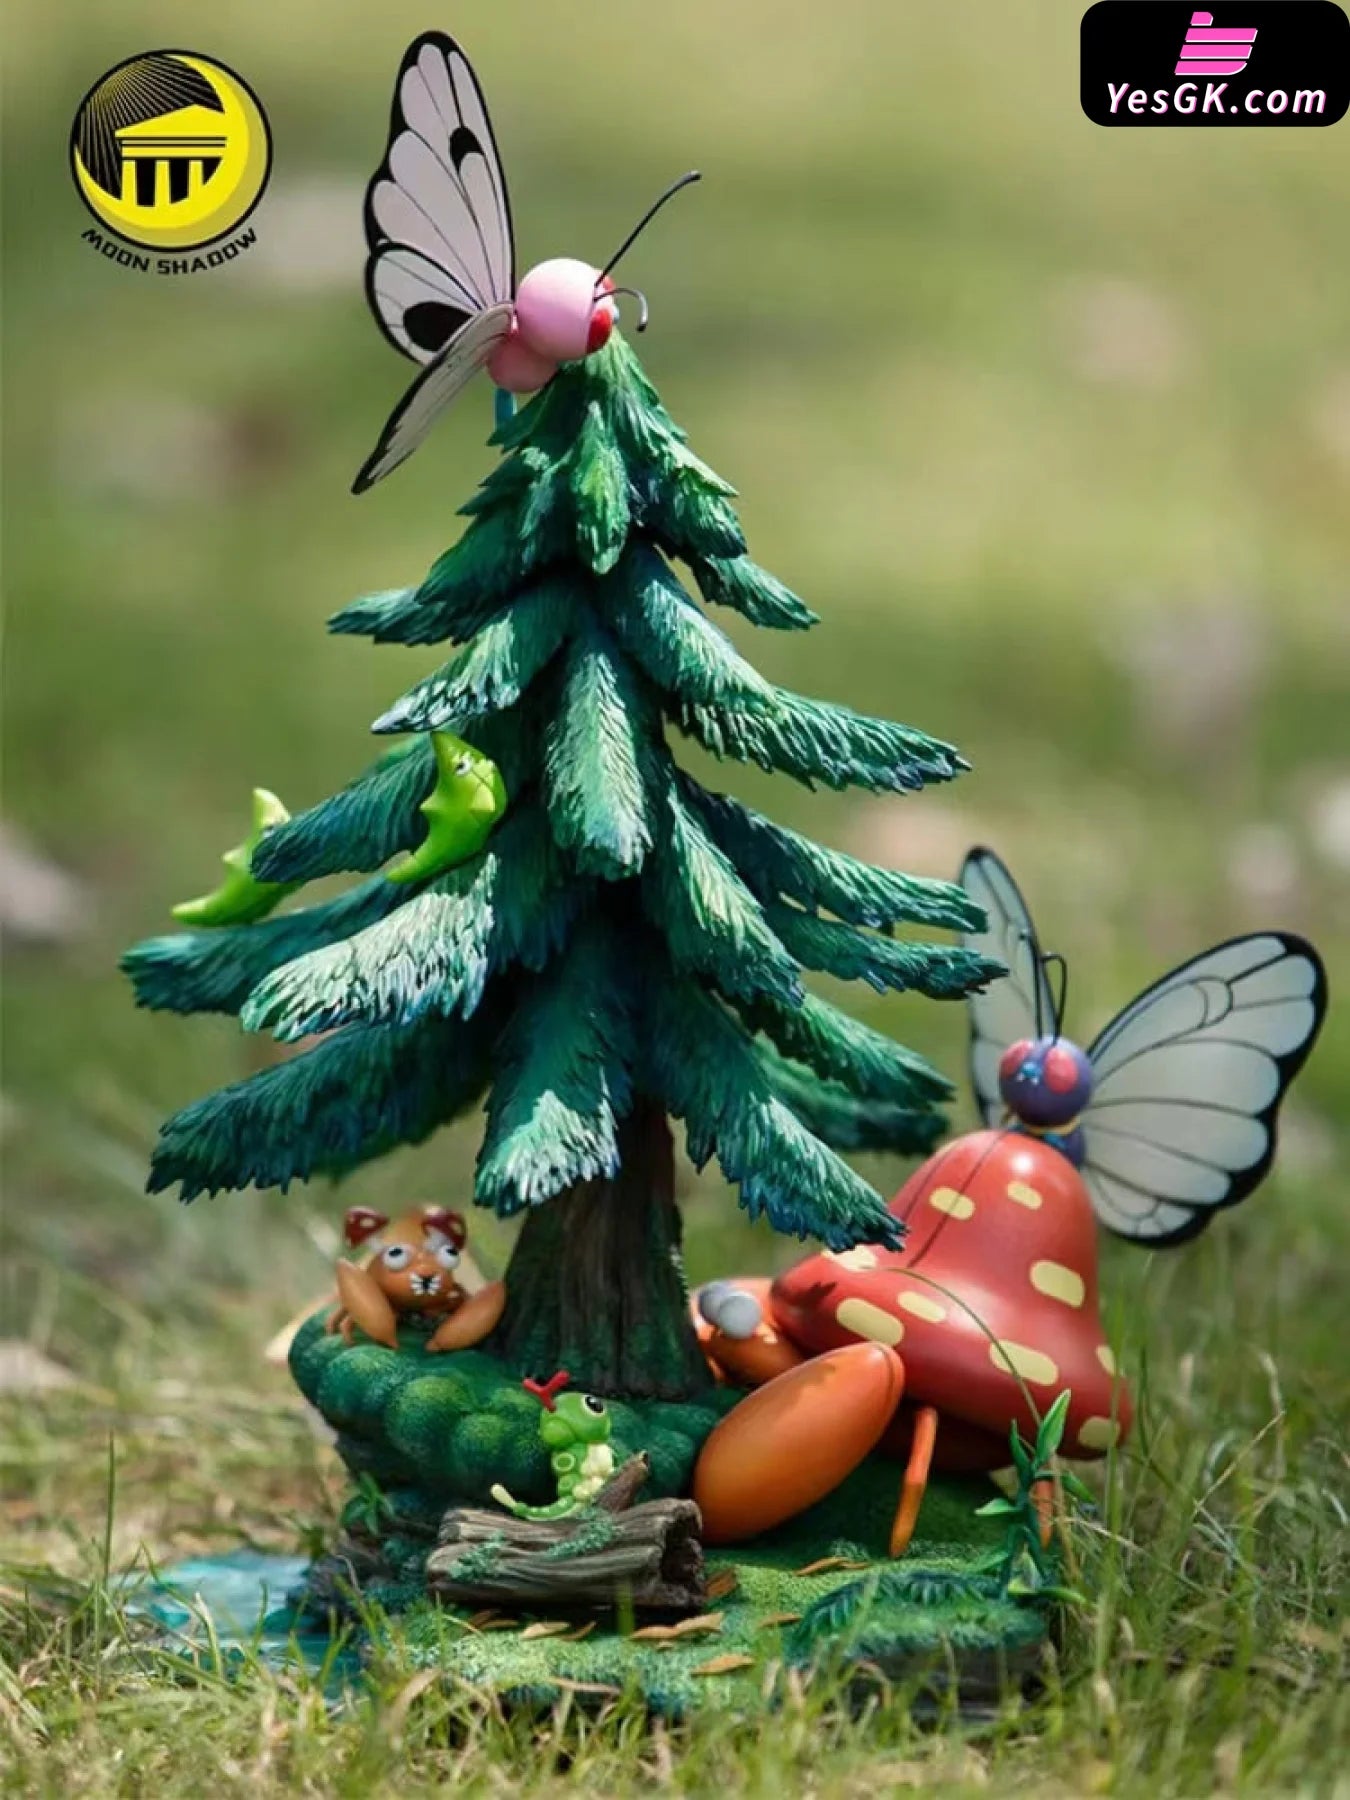 Pokémon Natural Forest Series #1 Butterfree & Parasect Family Resin Statue - Moon Shadow Studio [In